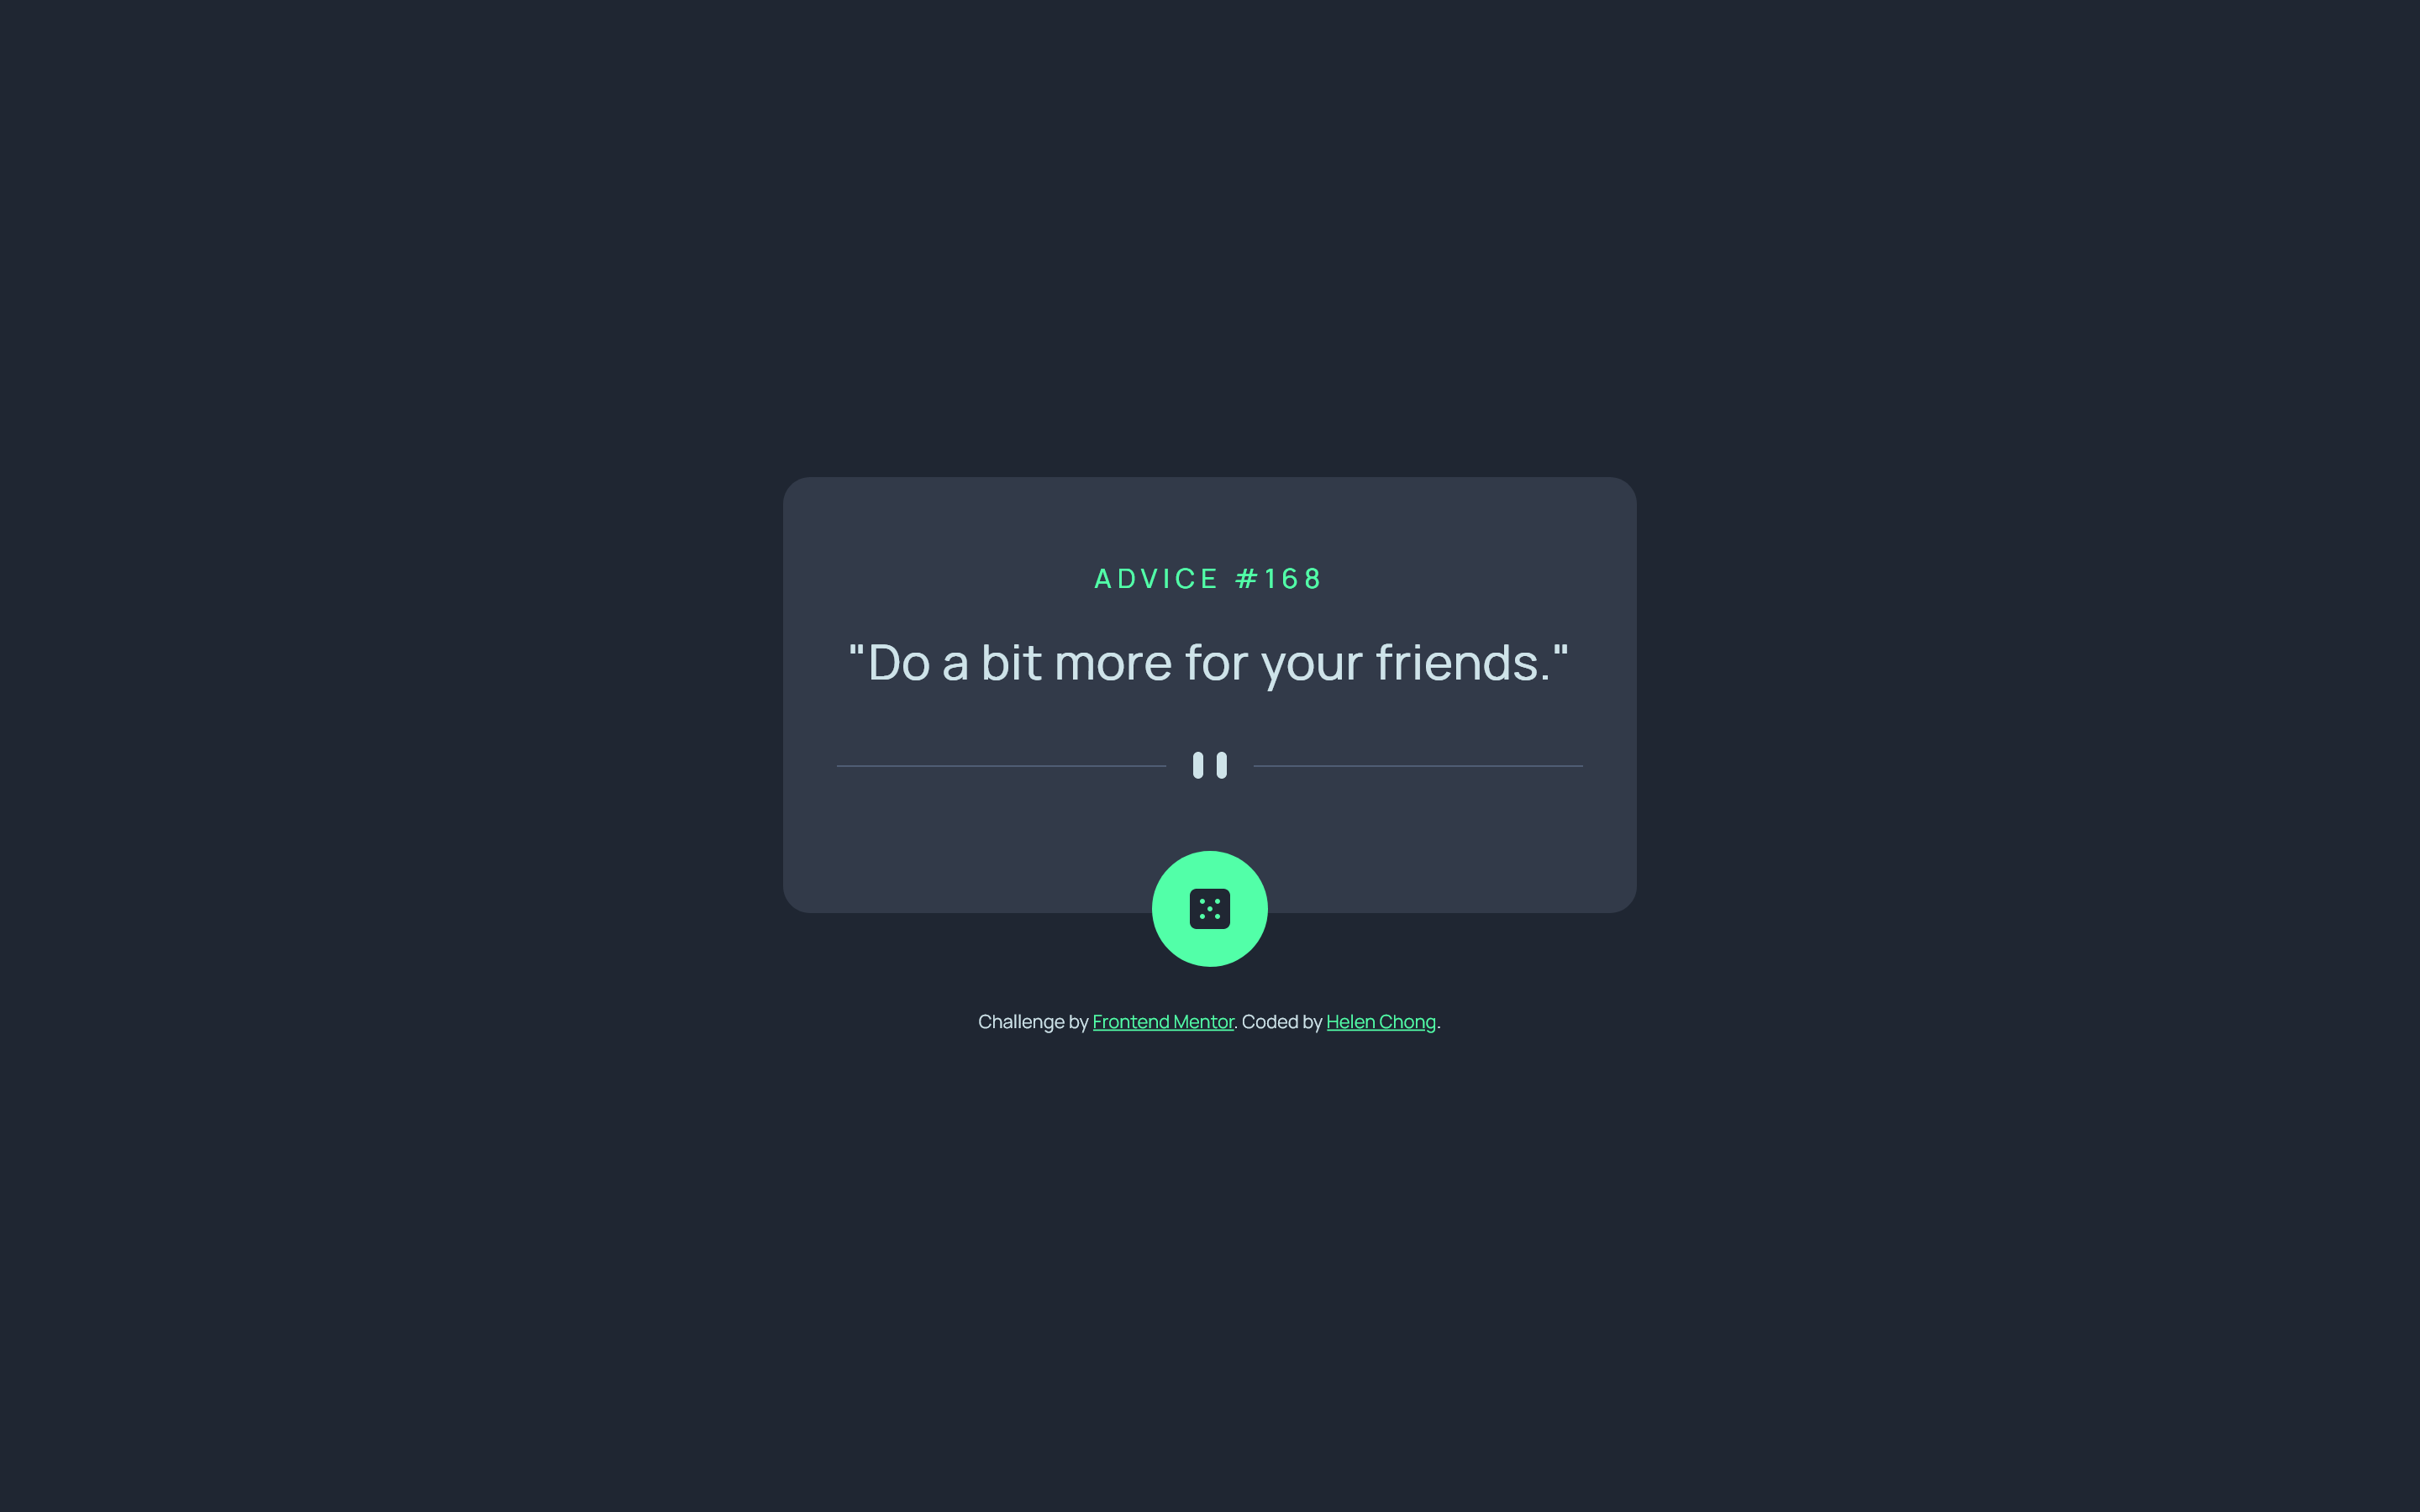 Screenshots of a solution to a Frontend Mentor challenge